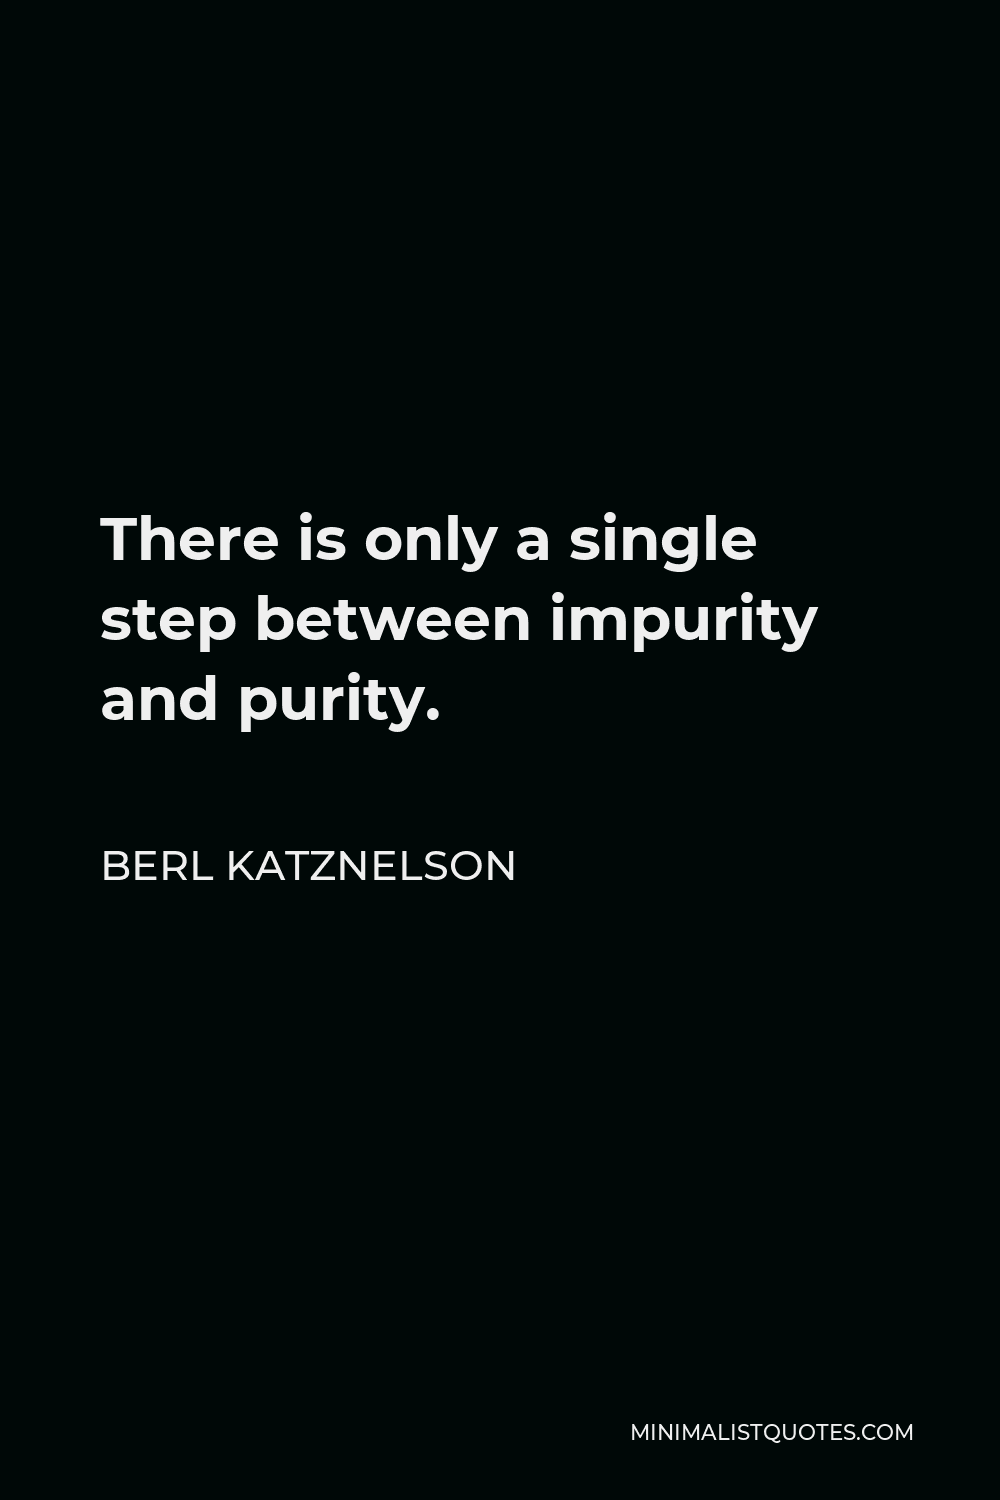 Berl Katznelson Quote - There is only a single step between impurity and purity.